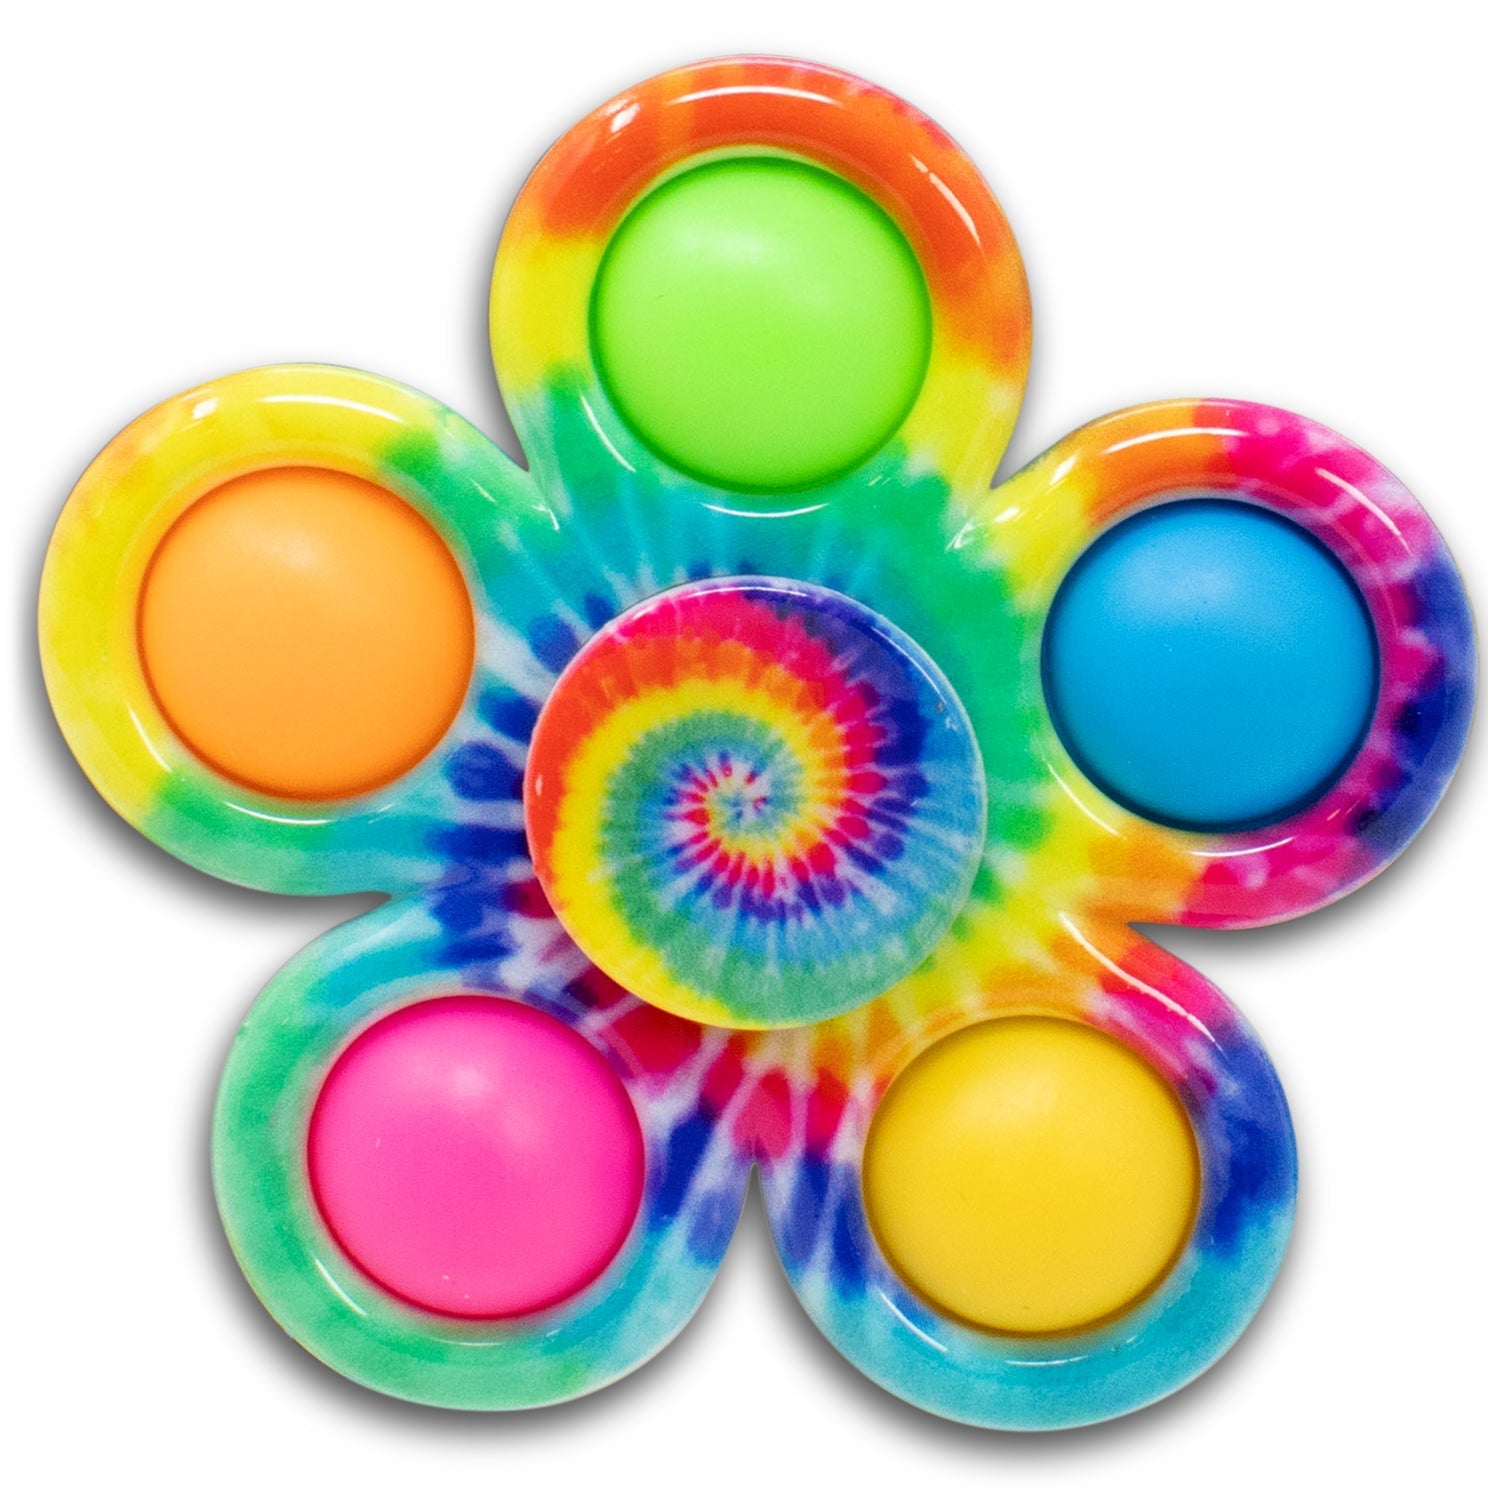 Bubble Pop Stick & Spin, Tie-Dye. Its high quality bearings. Gently flicked, the pop fidget toy spins like crazy!, The rotary bearings spin quietly, while the colorful flipping board and soft colorful buttons satisfy your optical appetites. Choose from 4 dazzling patterns. Press fidget spinner's soft buttons to promote tactile stimulation. It can relieve people's stress, release anxiety, rehabilitate your mood and get rid of boredom during the daily life. Tie-dye.